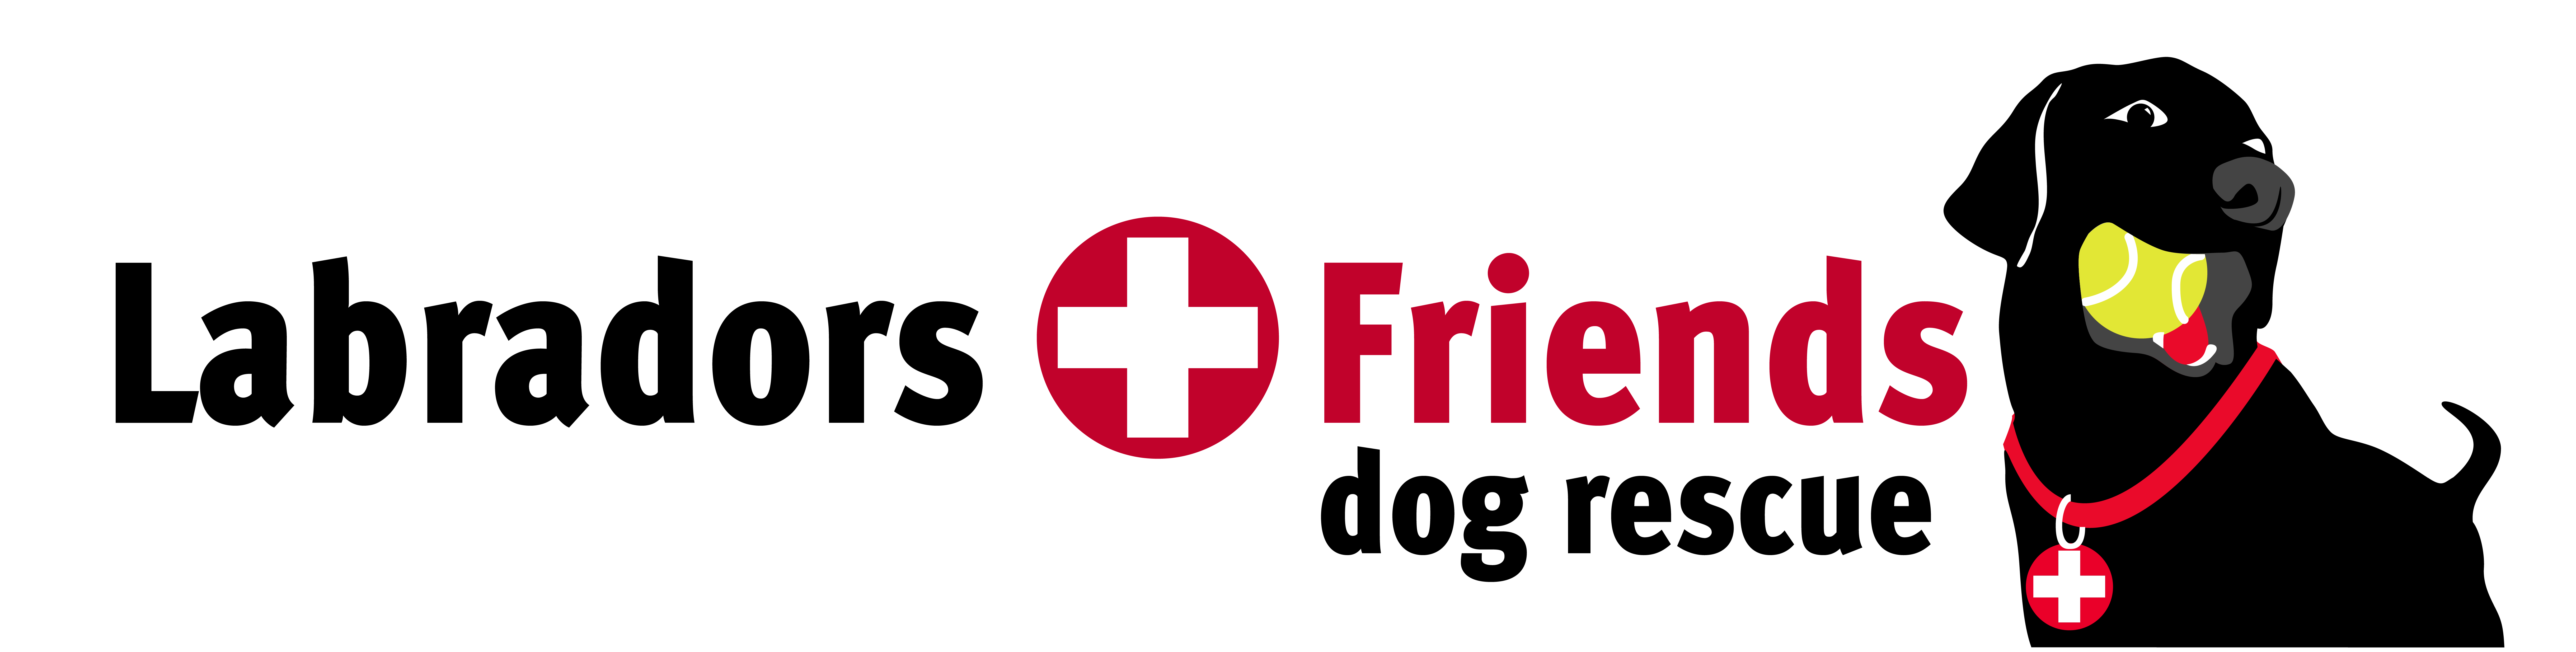 labradors and friends dog rescue